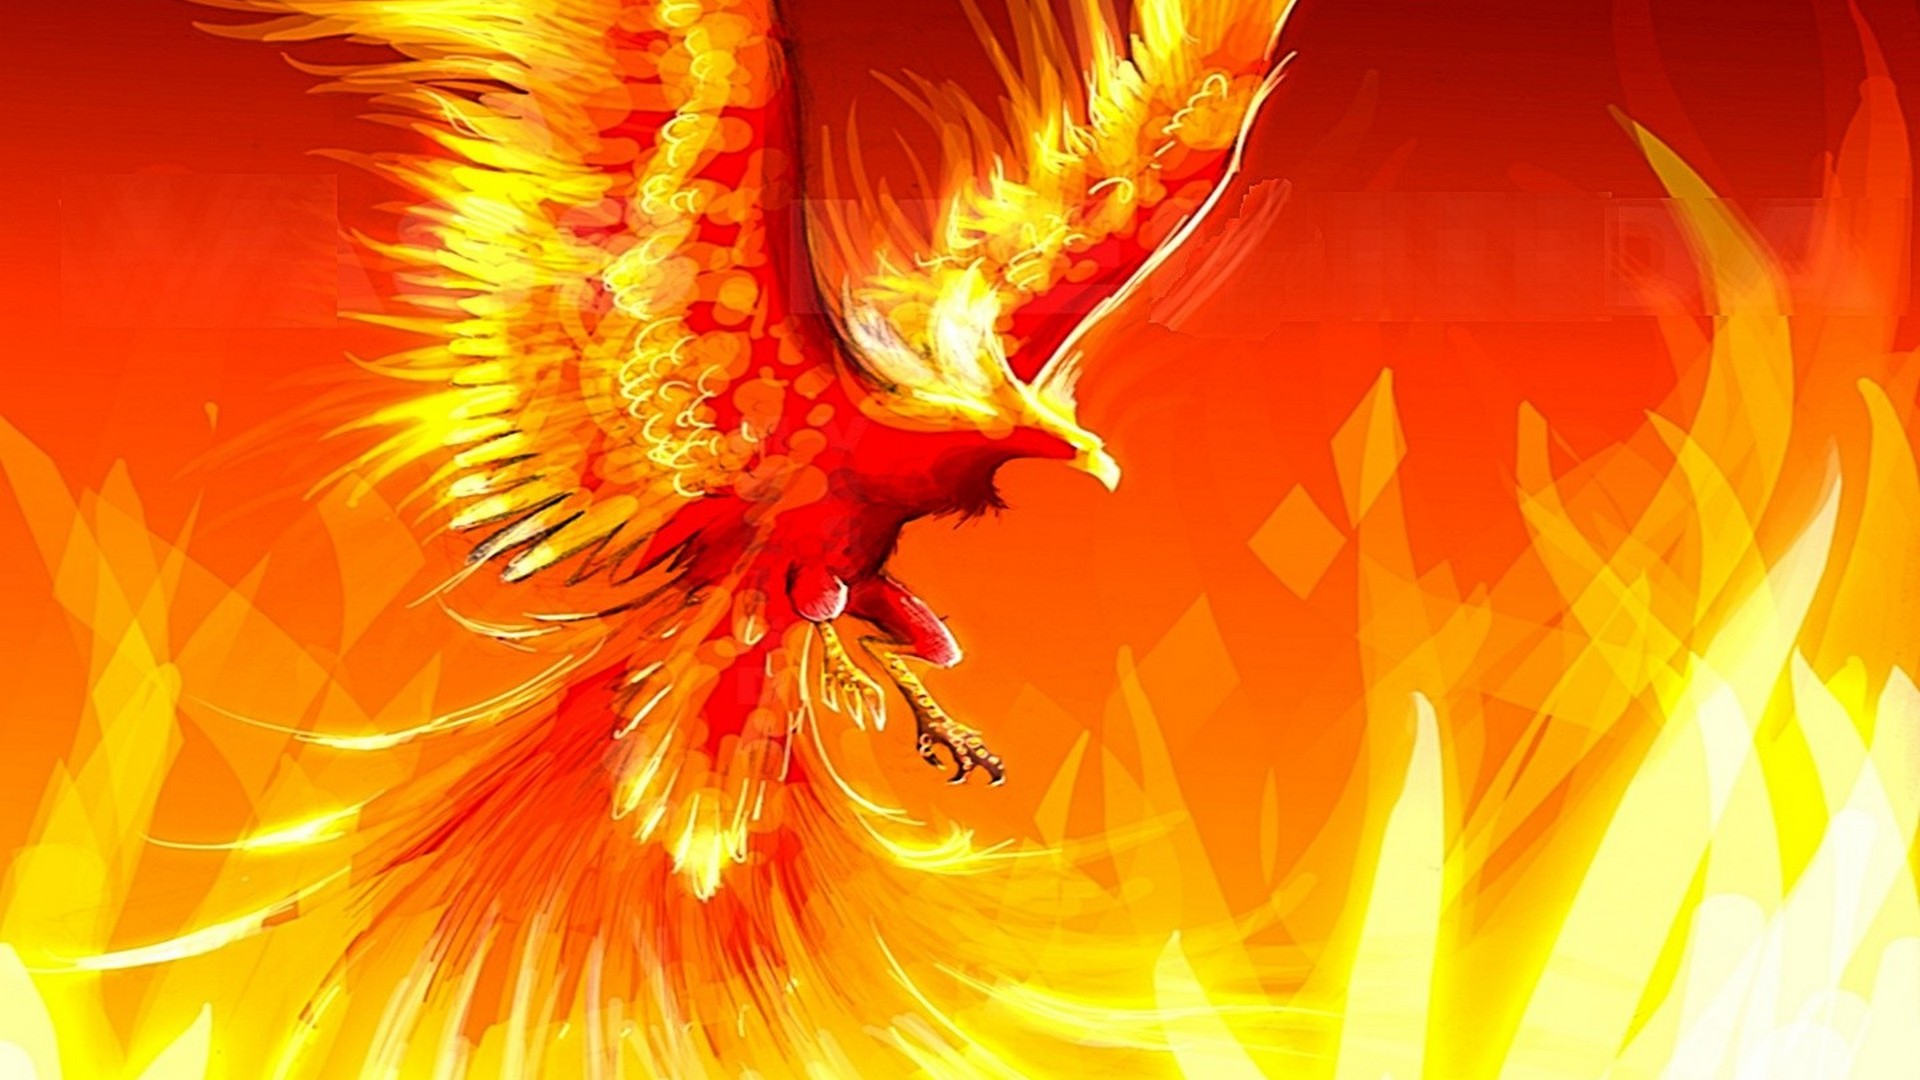 Phoenix Bird HD Wallpaper with image resolution 1920x1080 pixel. You can make this wallpaper for your Desktop Computer Backgrounds, Mac Wallpapers, Android Lock screen or iPhone Screensavers